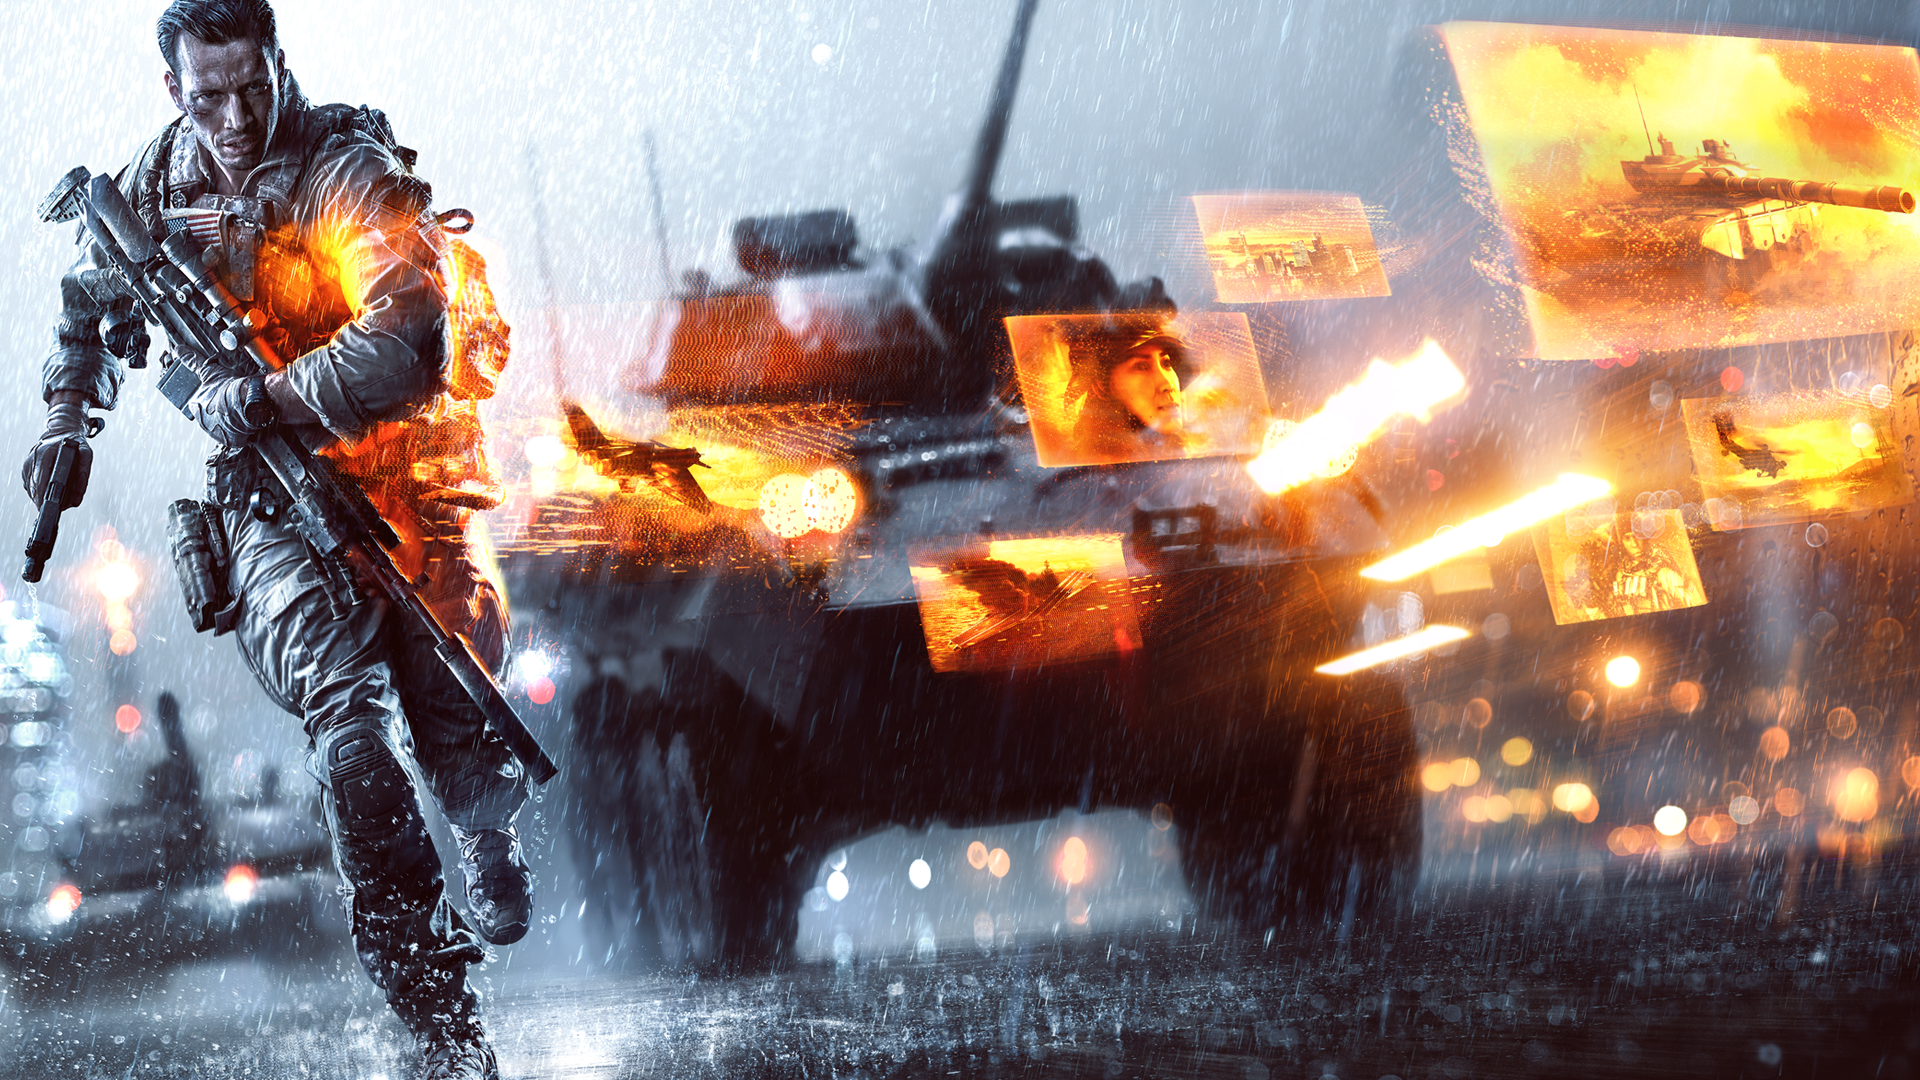 Battlefield 4 cover image